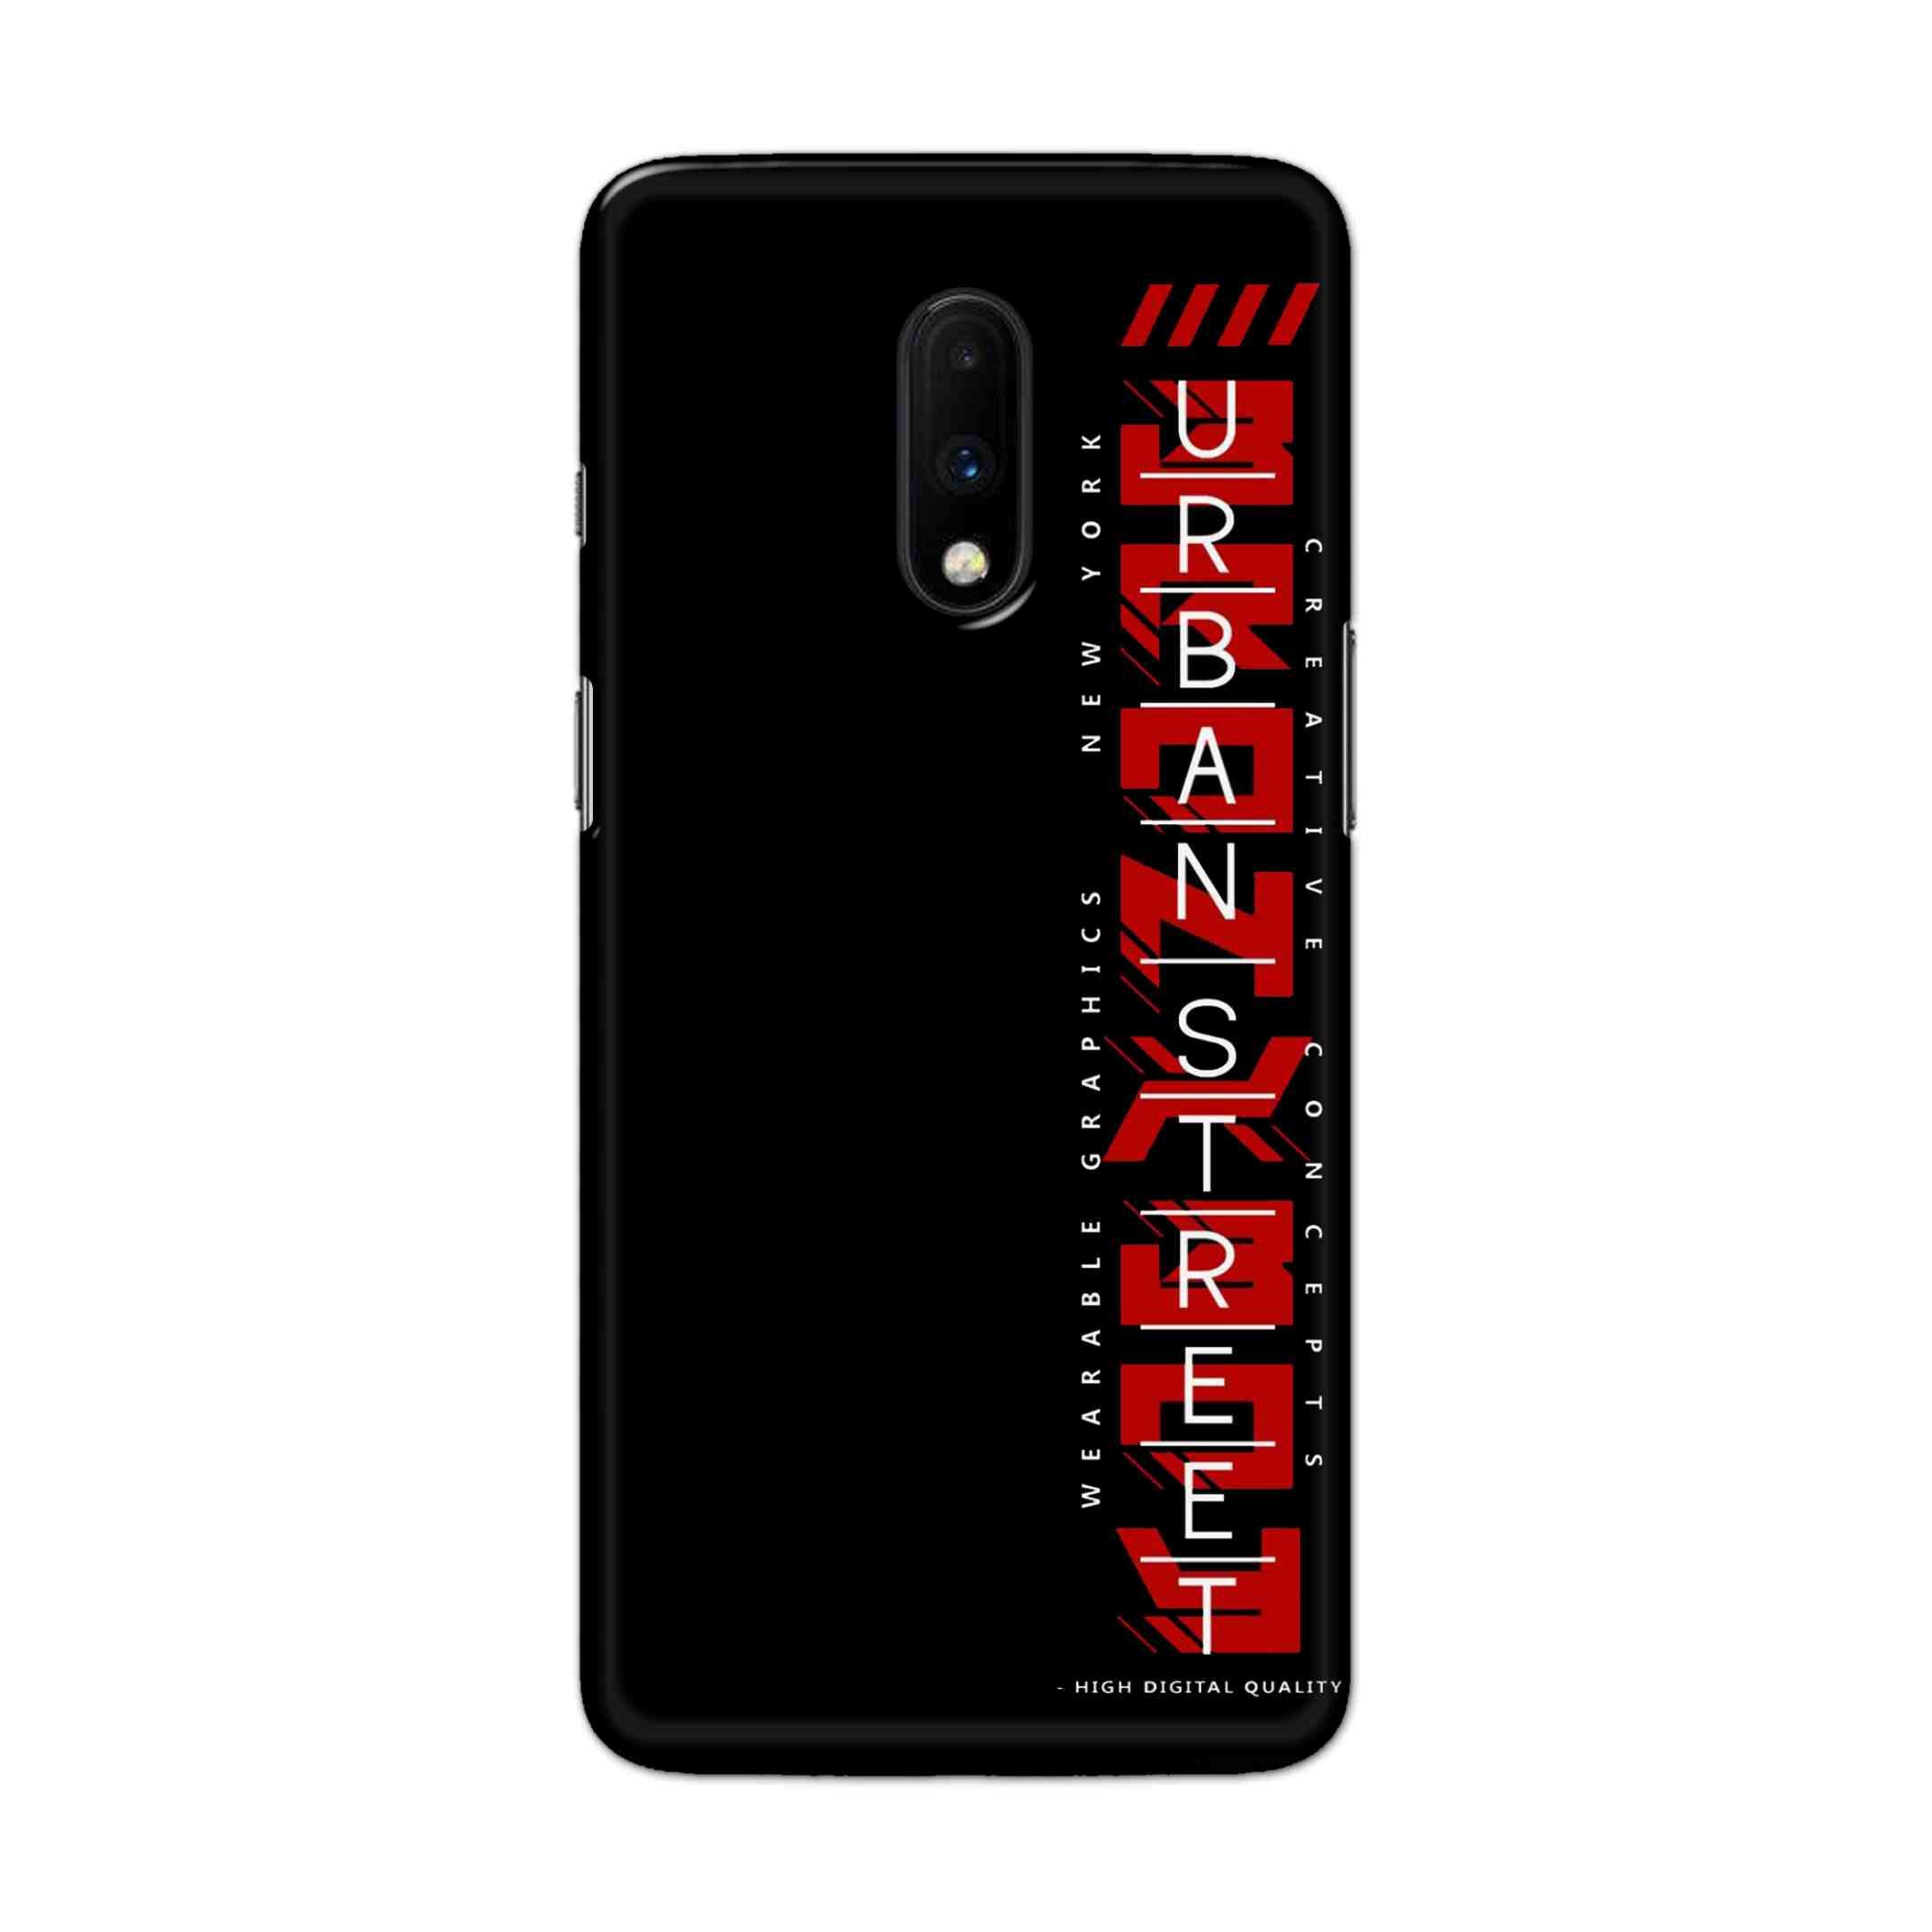 Buy Urban Street Hard Back Mobile Phone Case Cover For OnePlus 7 Online